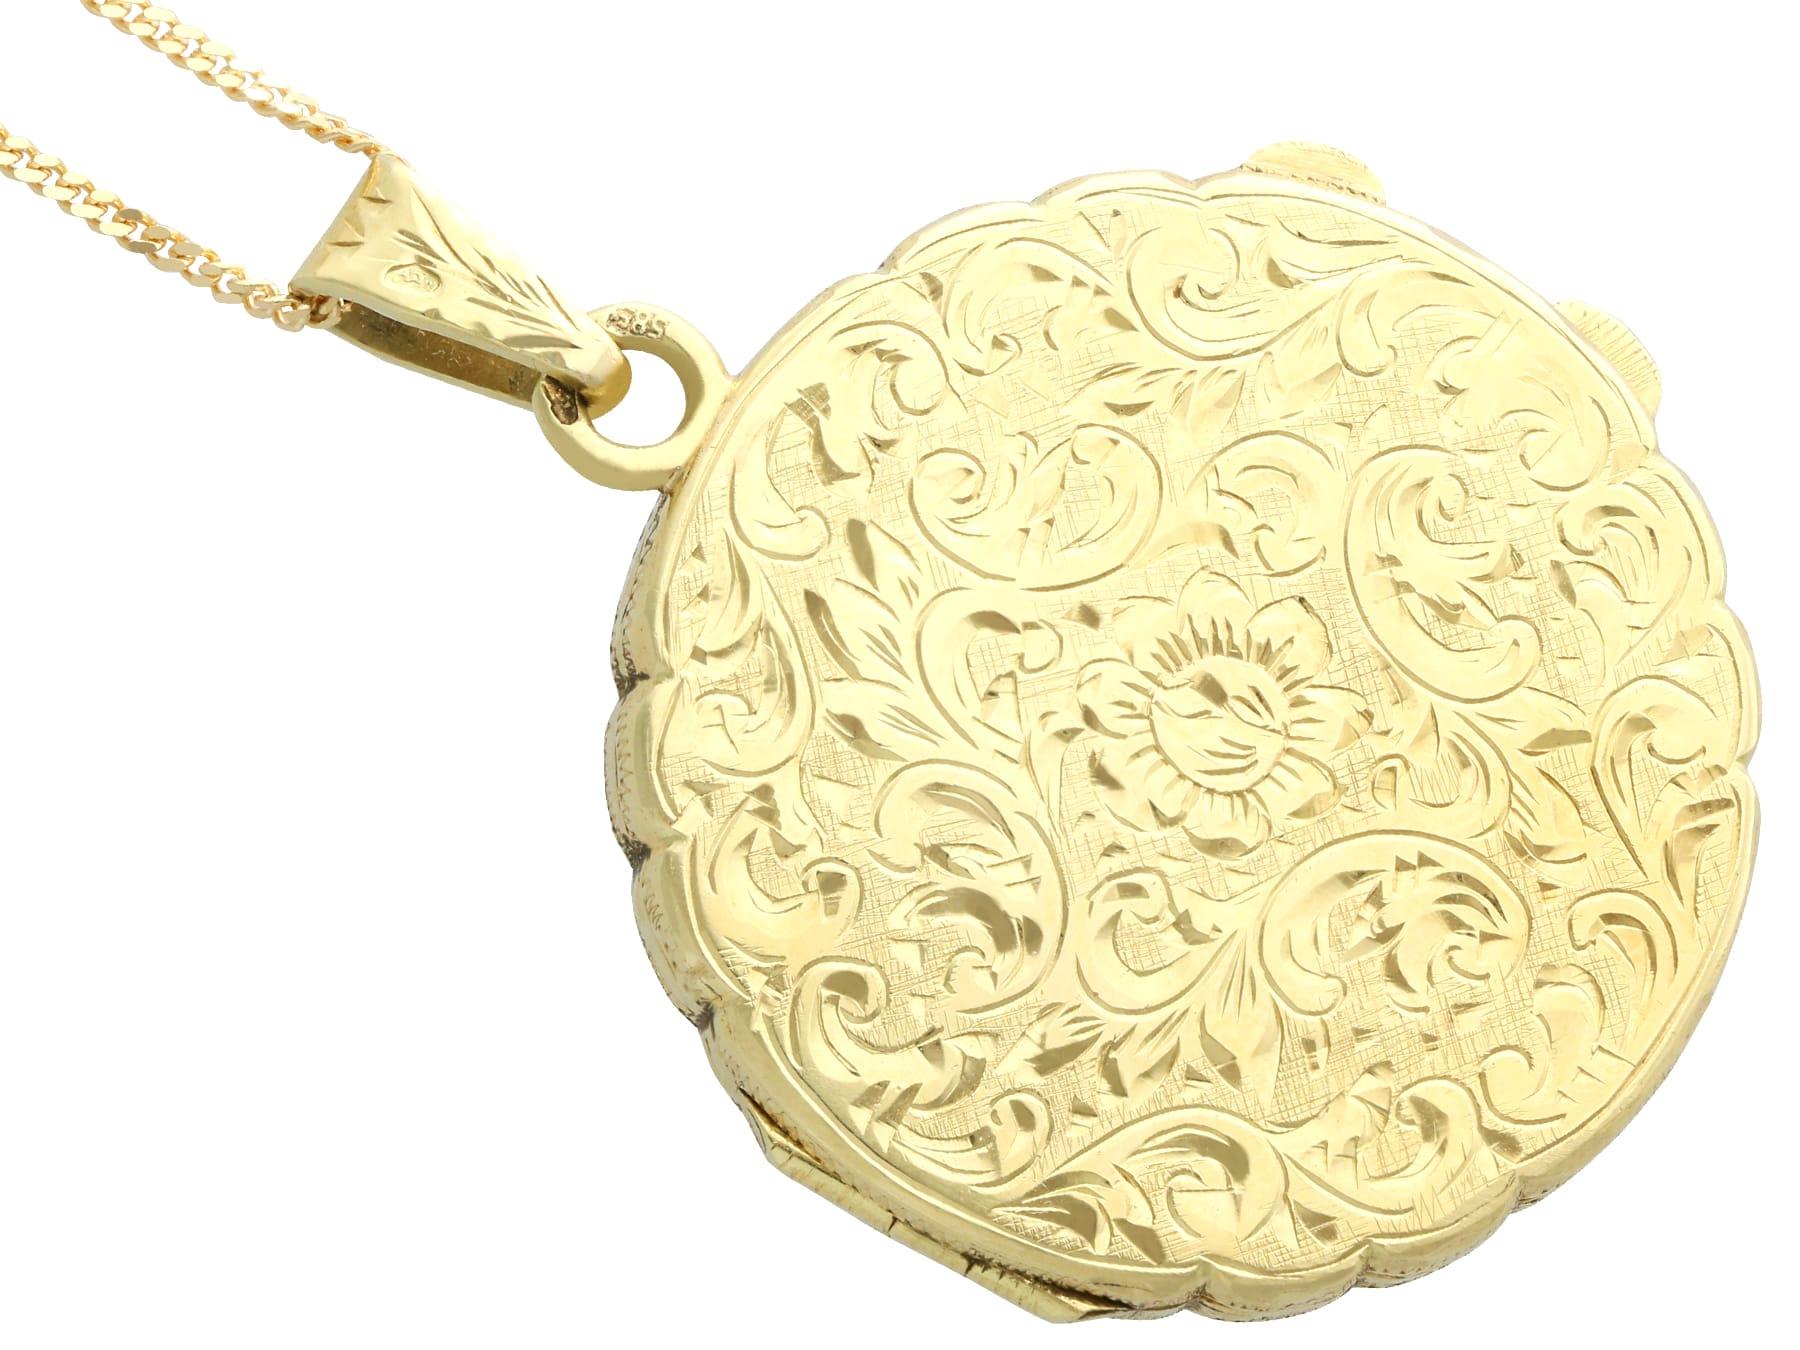 Antique 1930s Enamel and 14k Yellow Gold Pendant / Locket For Sale 1